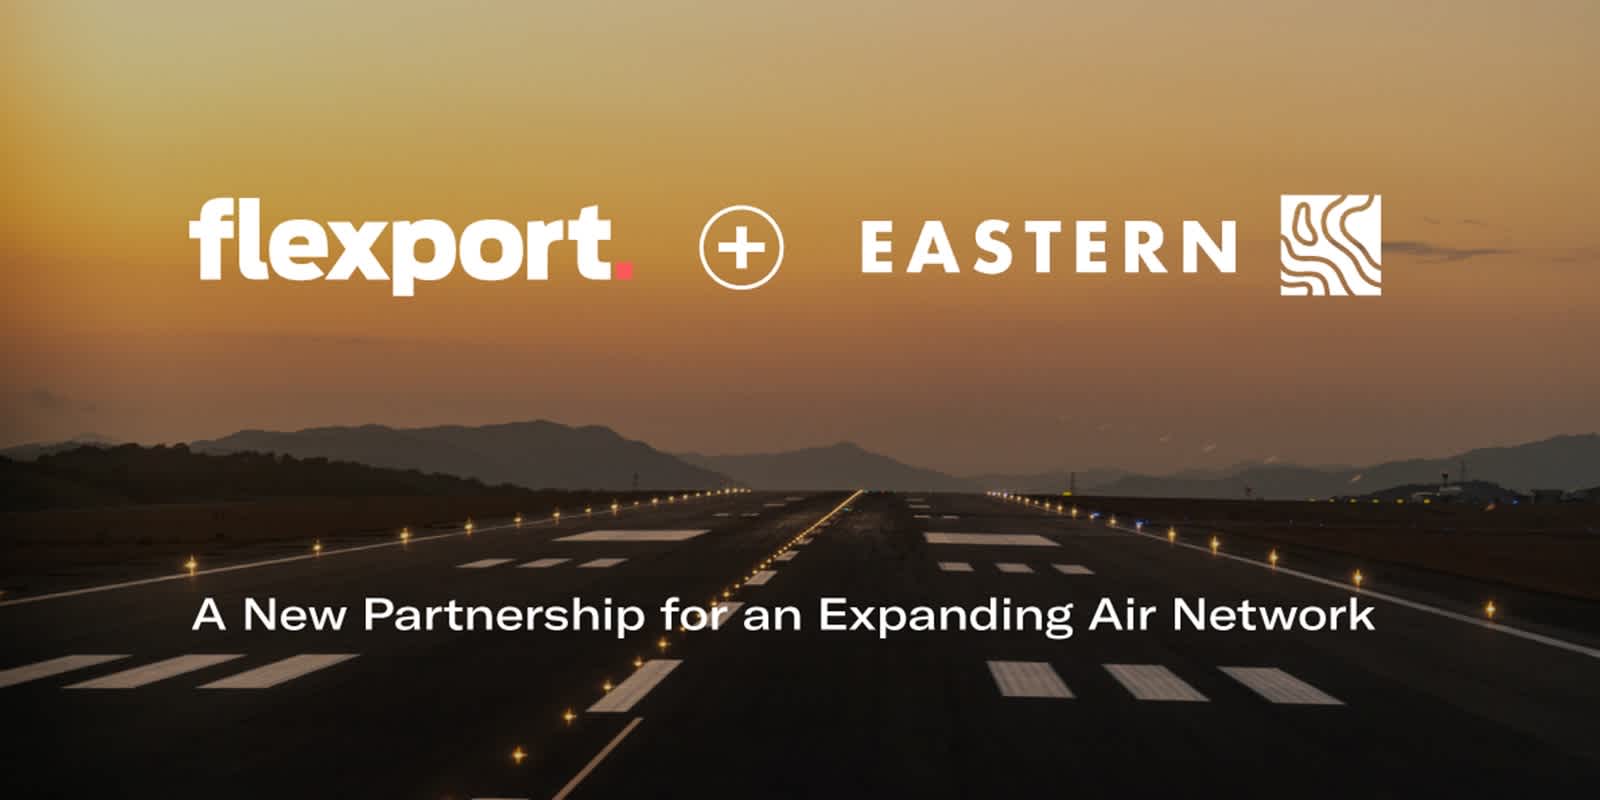 Eastern Airlines and Flexport - A new partnership for an expanding air network.